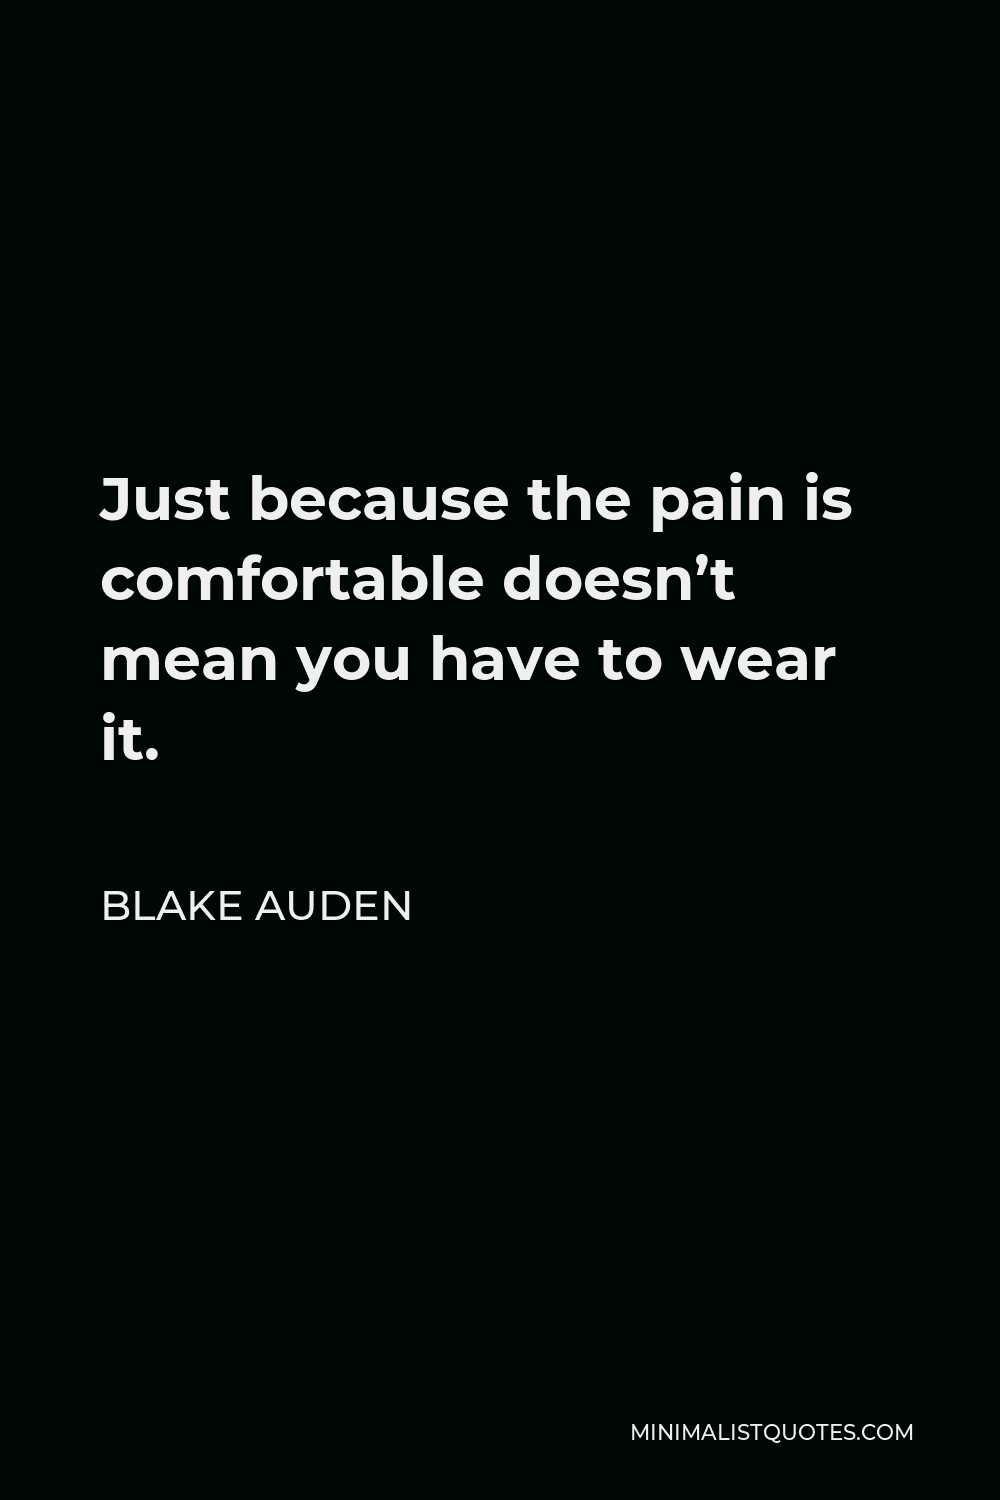 Blake Auden Quote - Just because the pain is comfortable doesn’t mean you have to wear it.